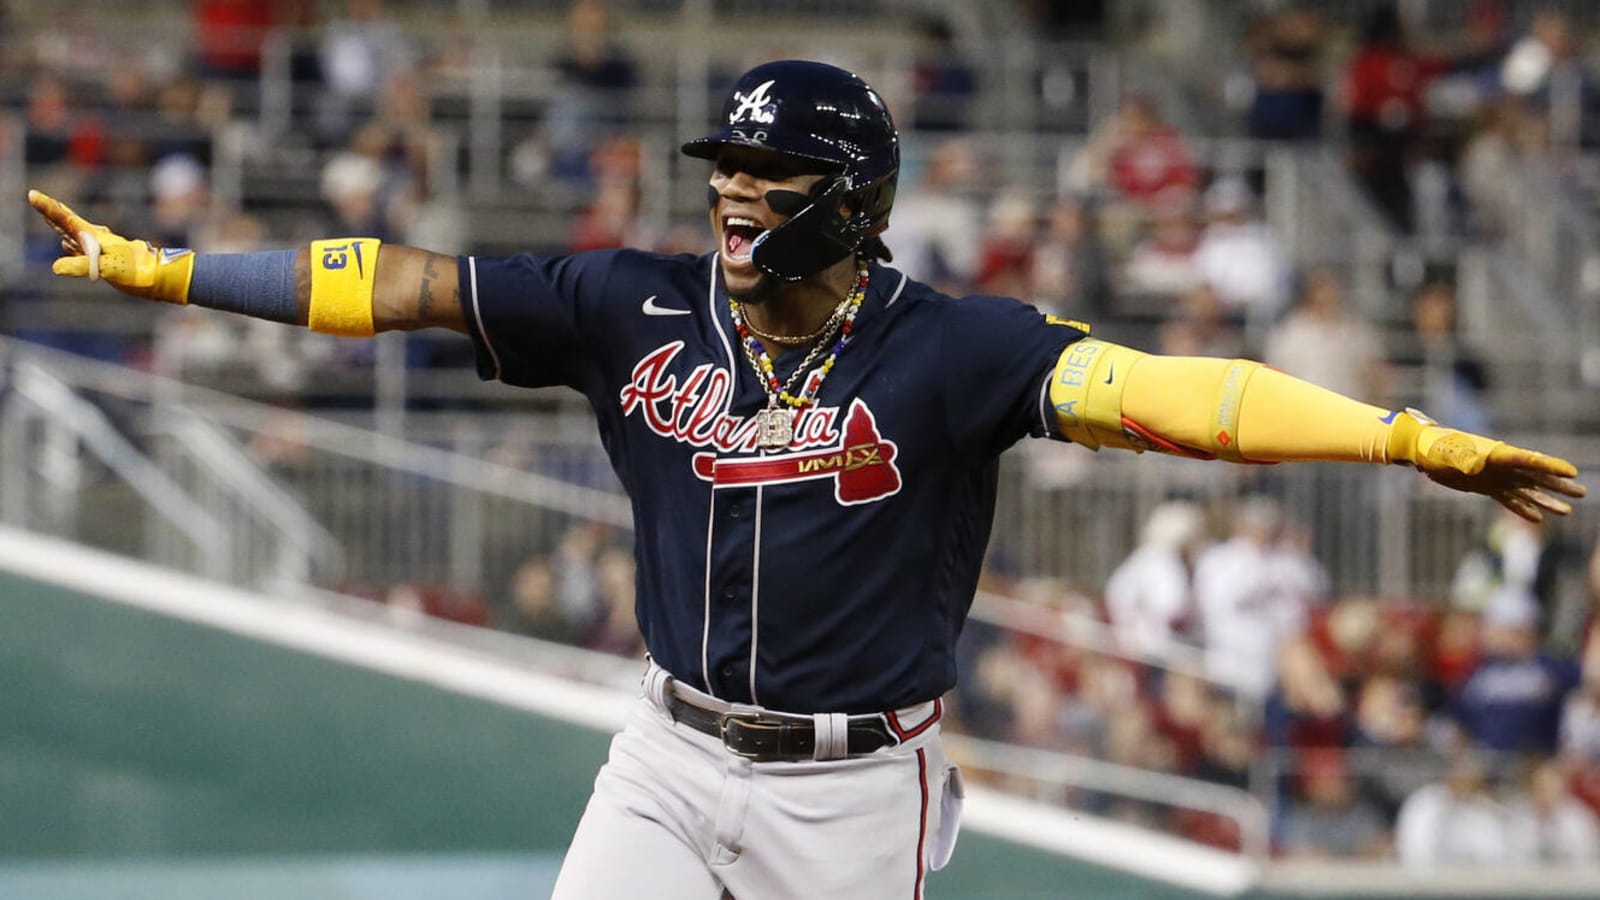 Ronald Acuña Jr. joins exclusive 40-40 club with 40th home run of